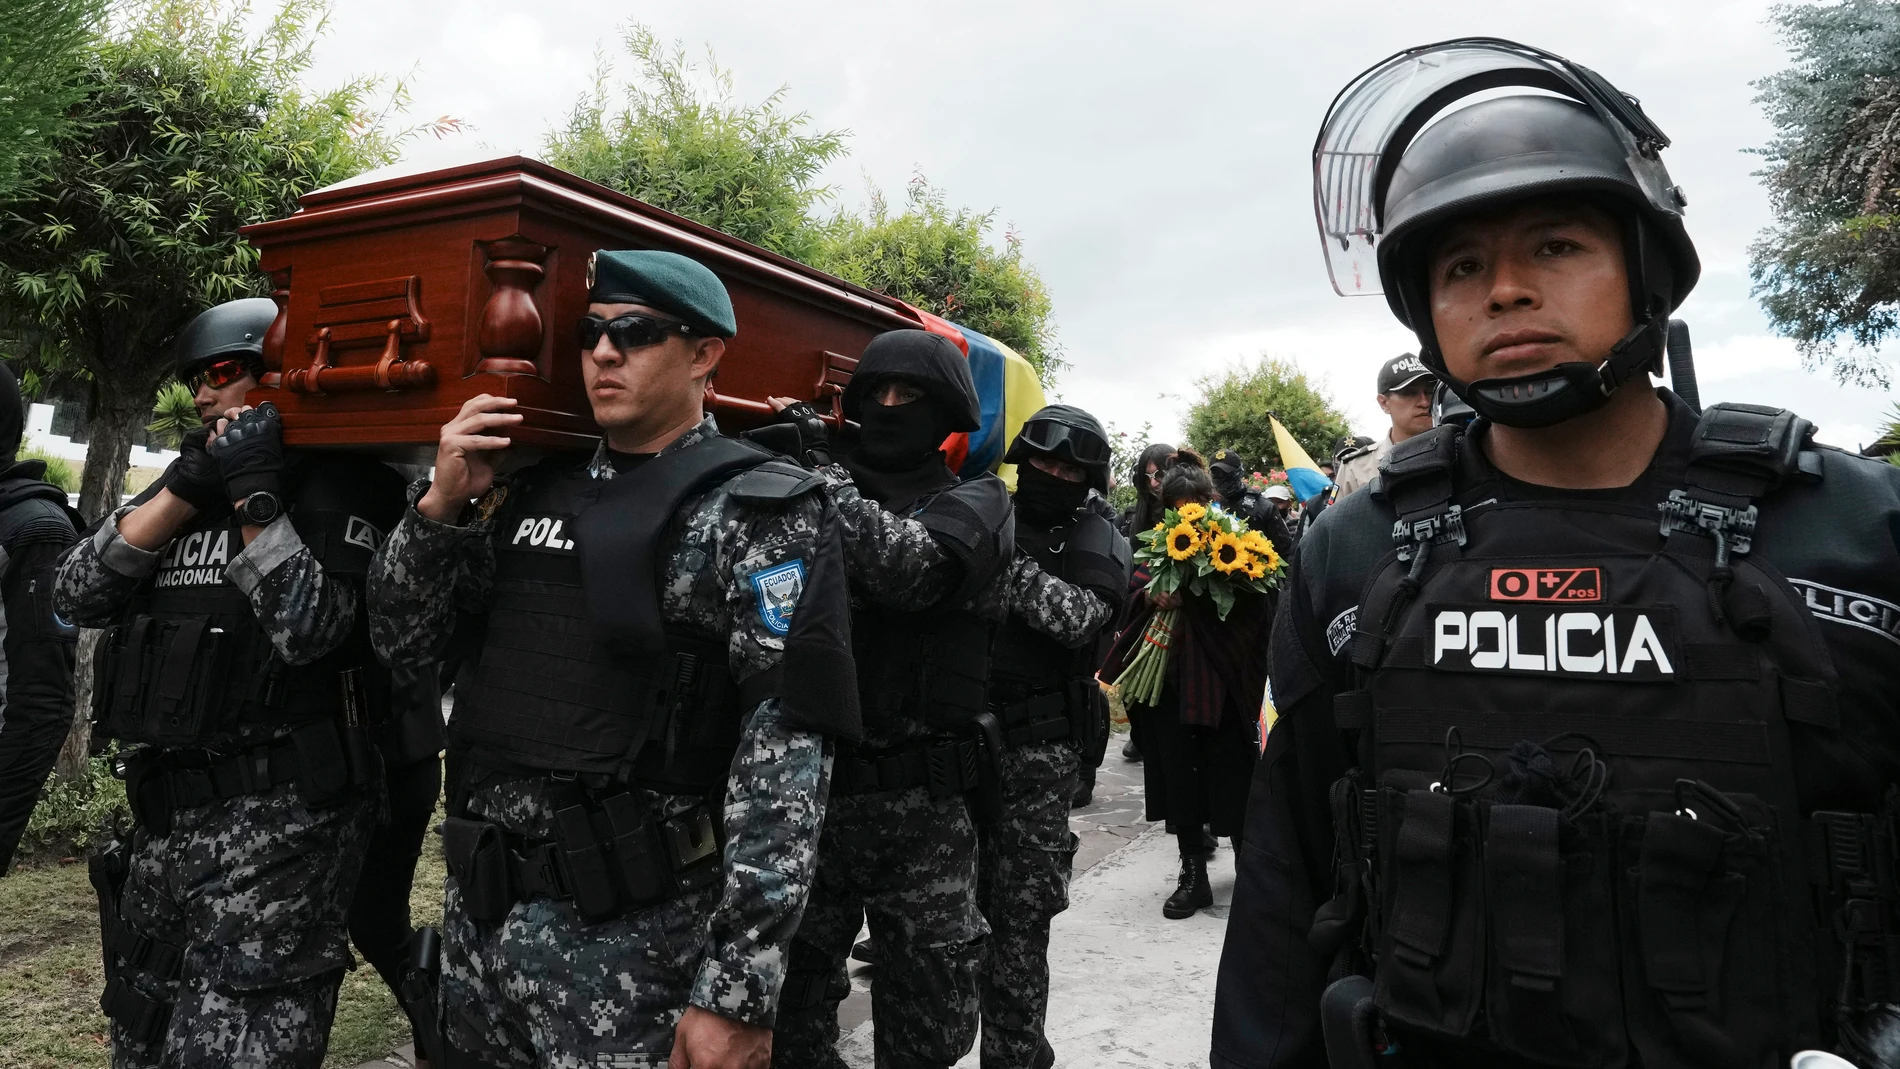 Police carry the remains of slain presidential candidate Fernando Villavicencio to a chapel before his burial Camposanto Monteolivo cemetery in Quito, Ecuador, Friday, Aug. 11, 2023. The 59-year-old was fatally shot at a political rally on Aug. 9 in Quito. (AP Photo/Dolores Ochoa)